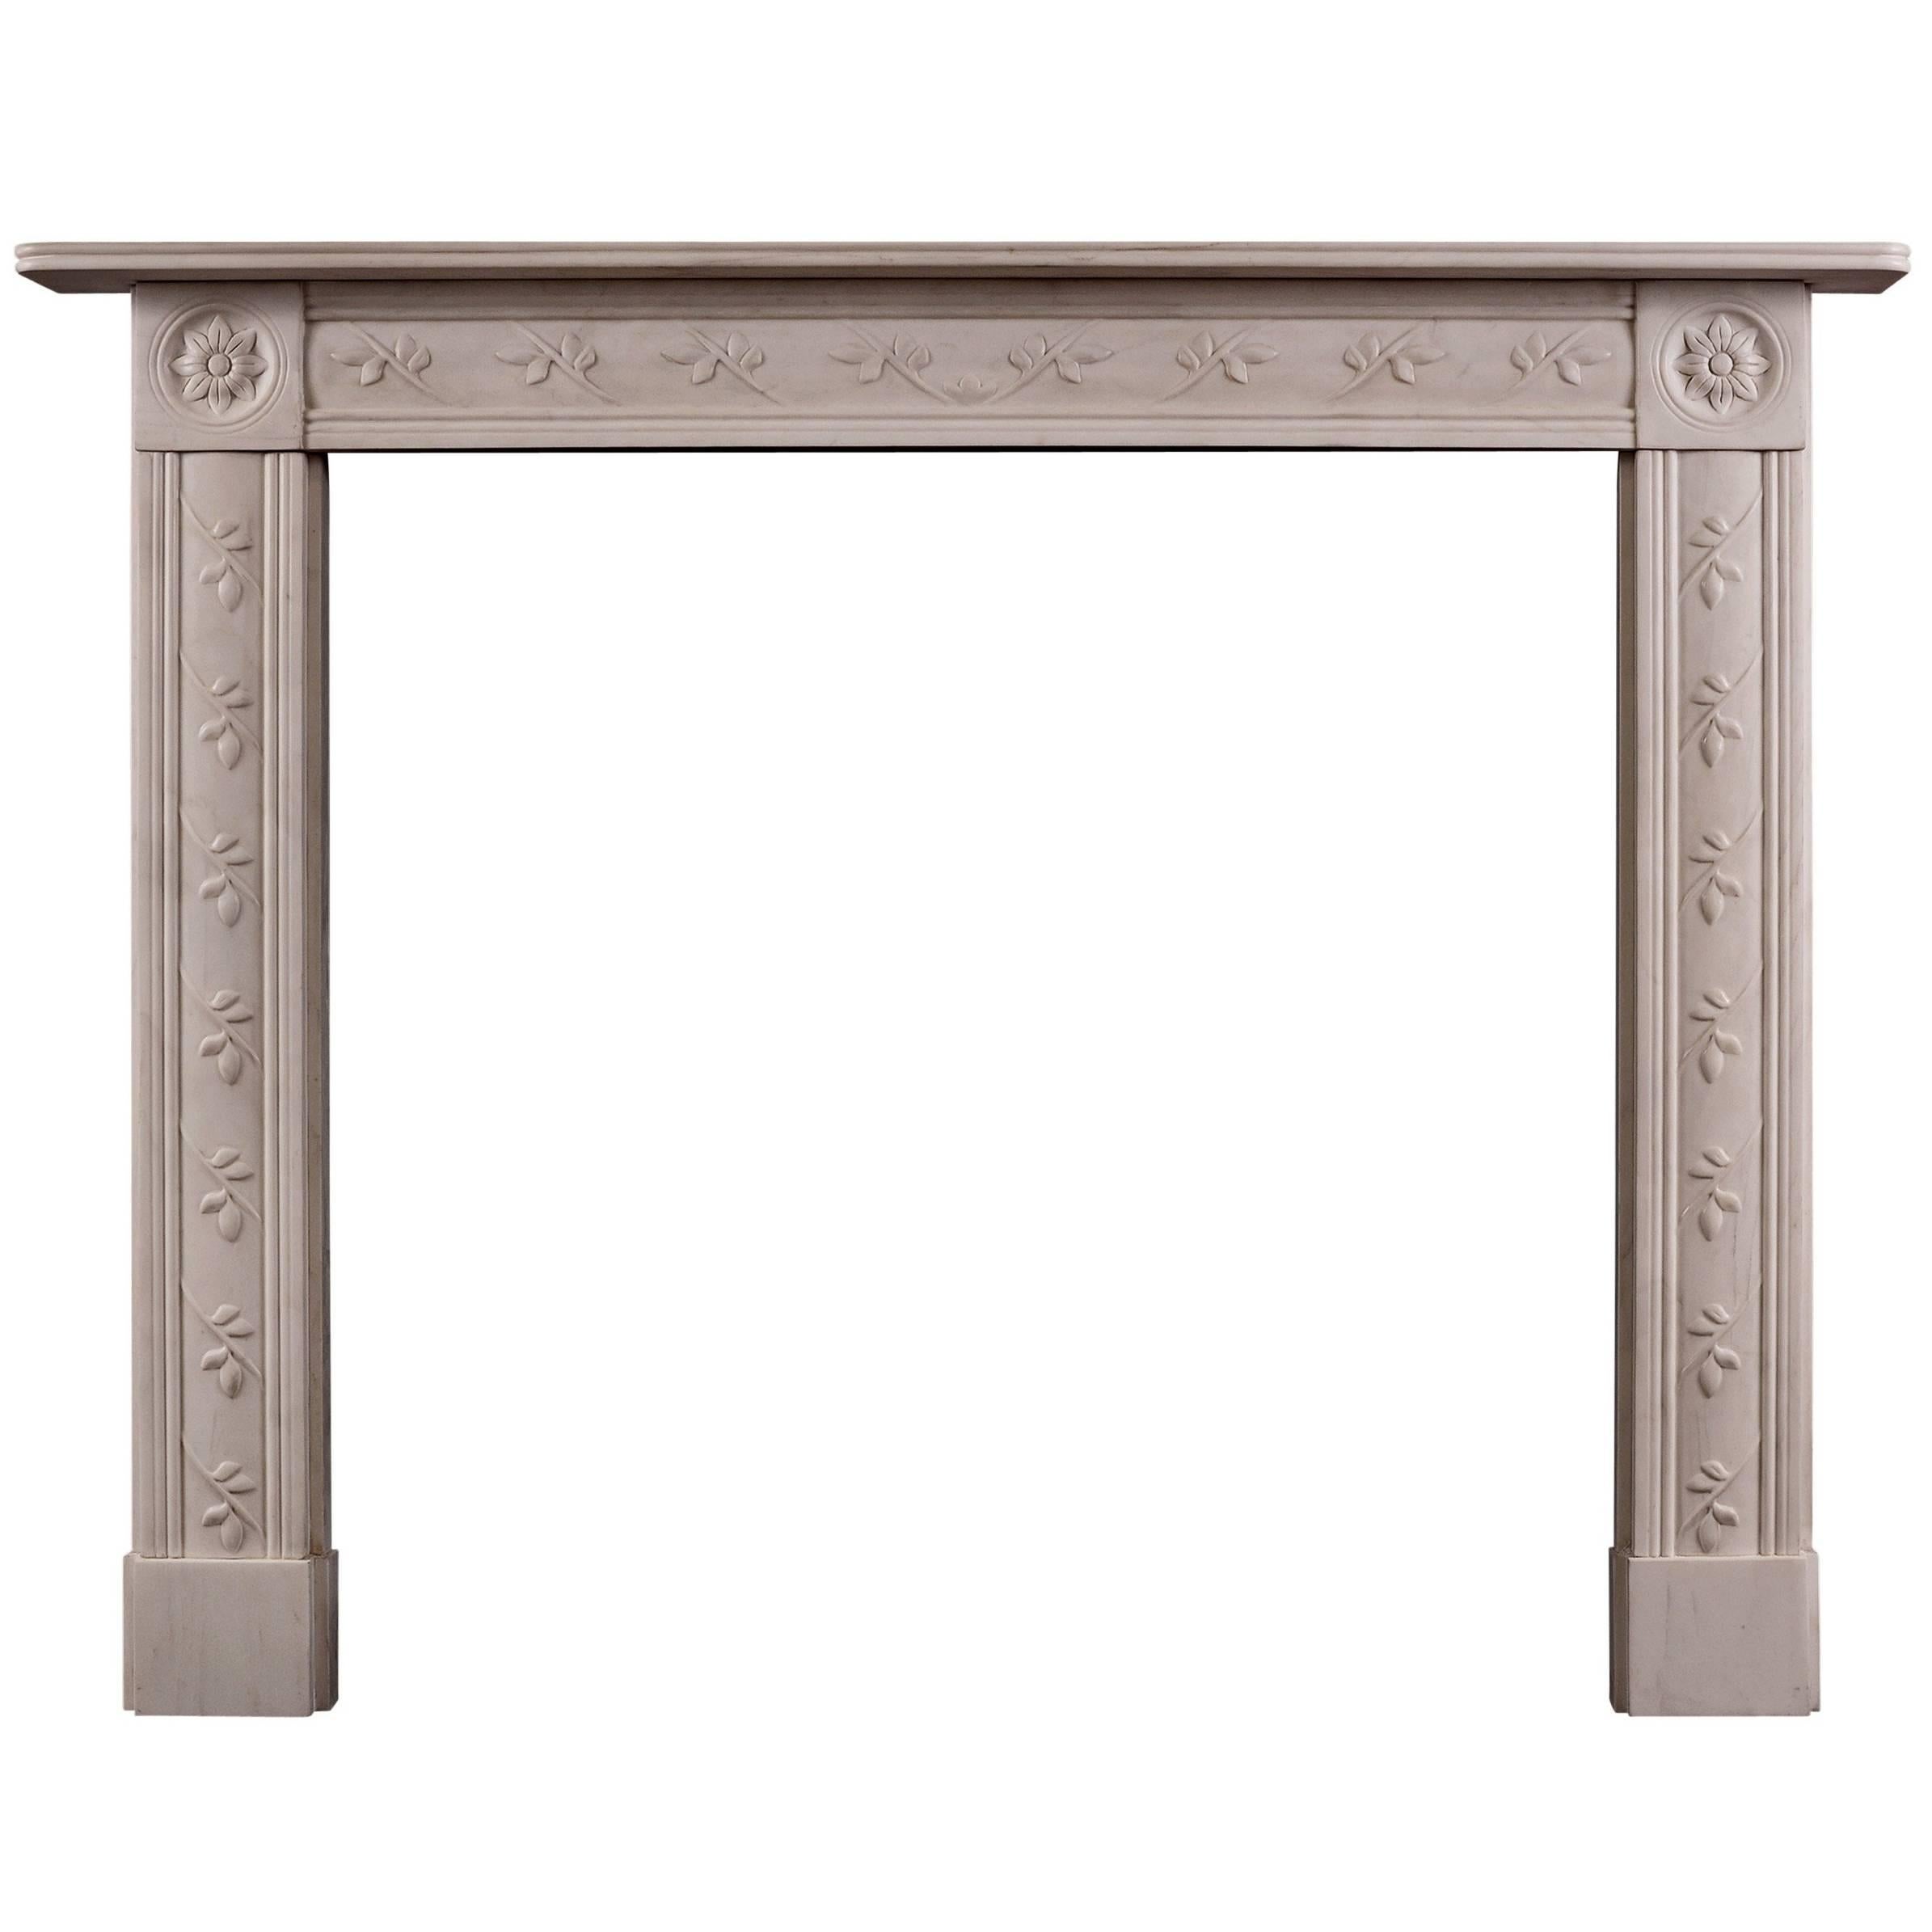 Delicate English Regency White Marble Fireplace For Sale